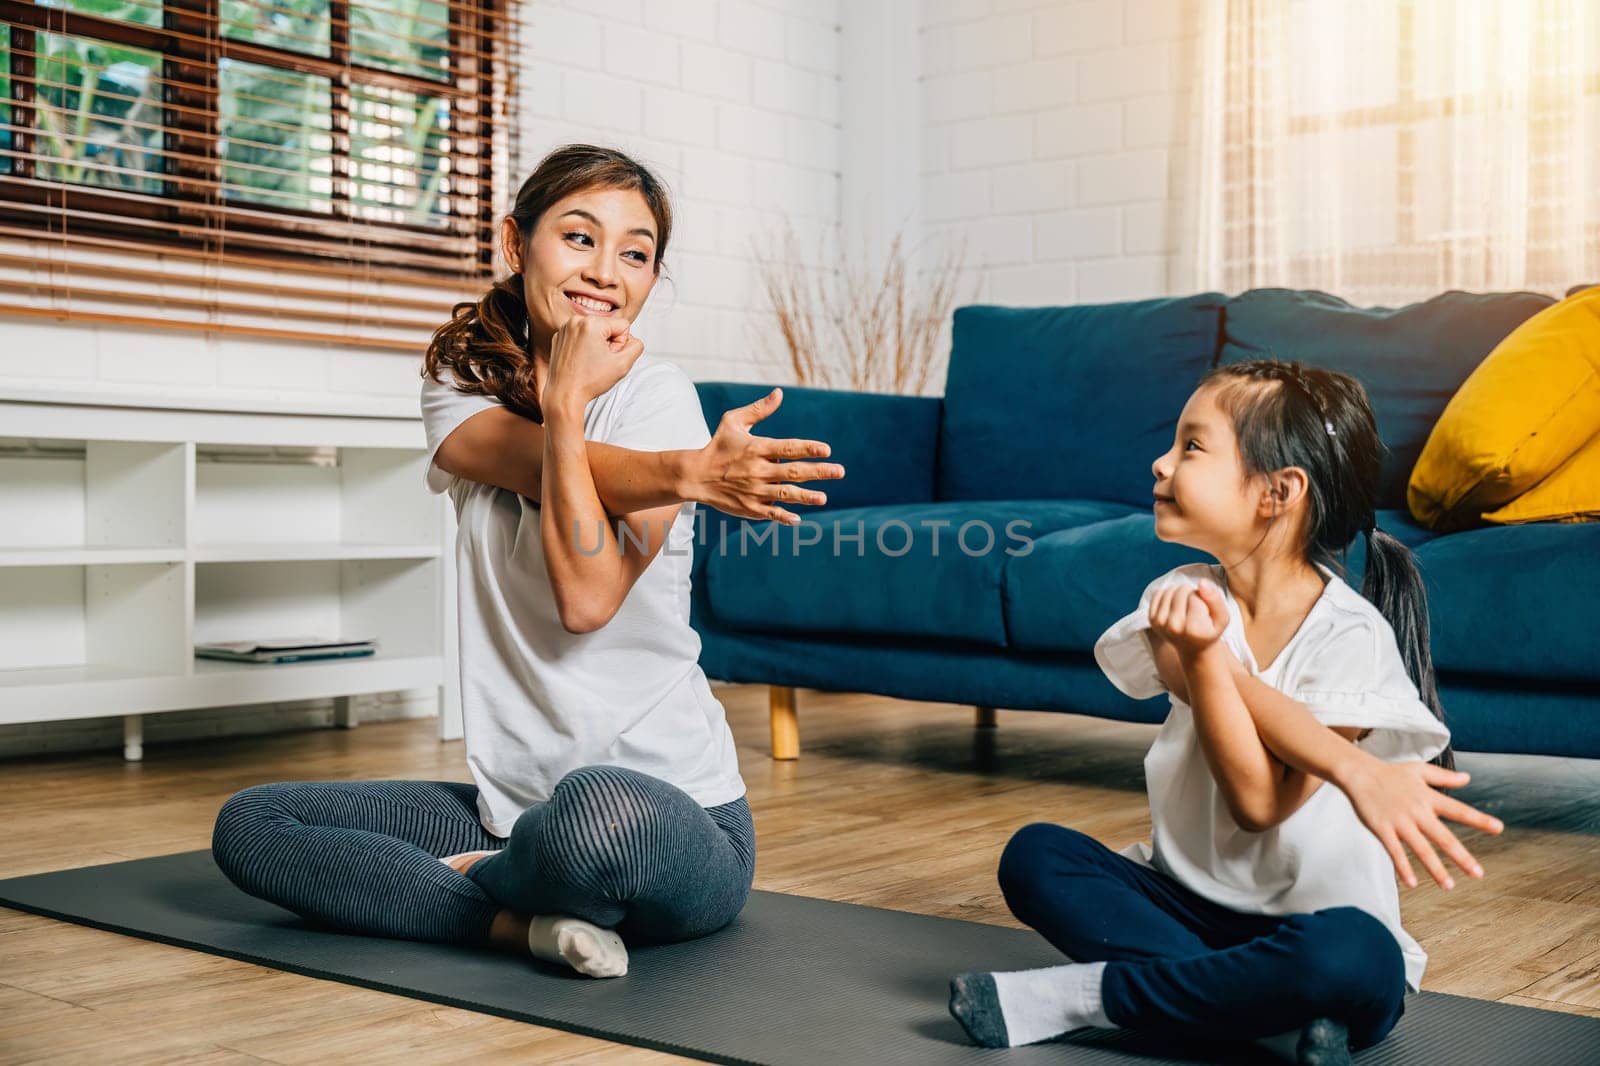 In the gym a mother and her daughter embrace stretching and yoga promoting togetherness strength and happiness radiating smiles and positivity in their family fitness routine.